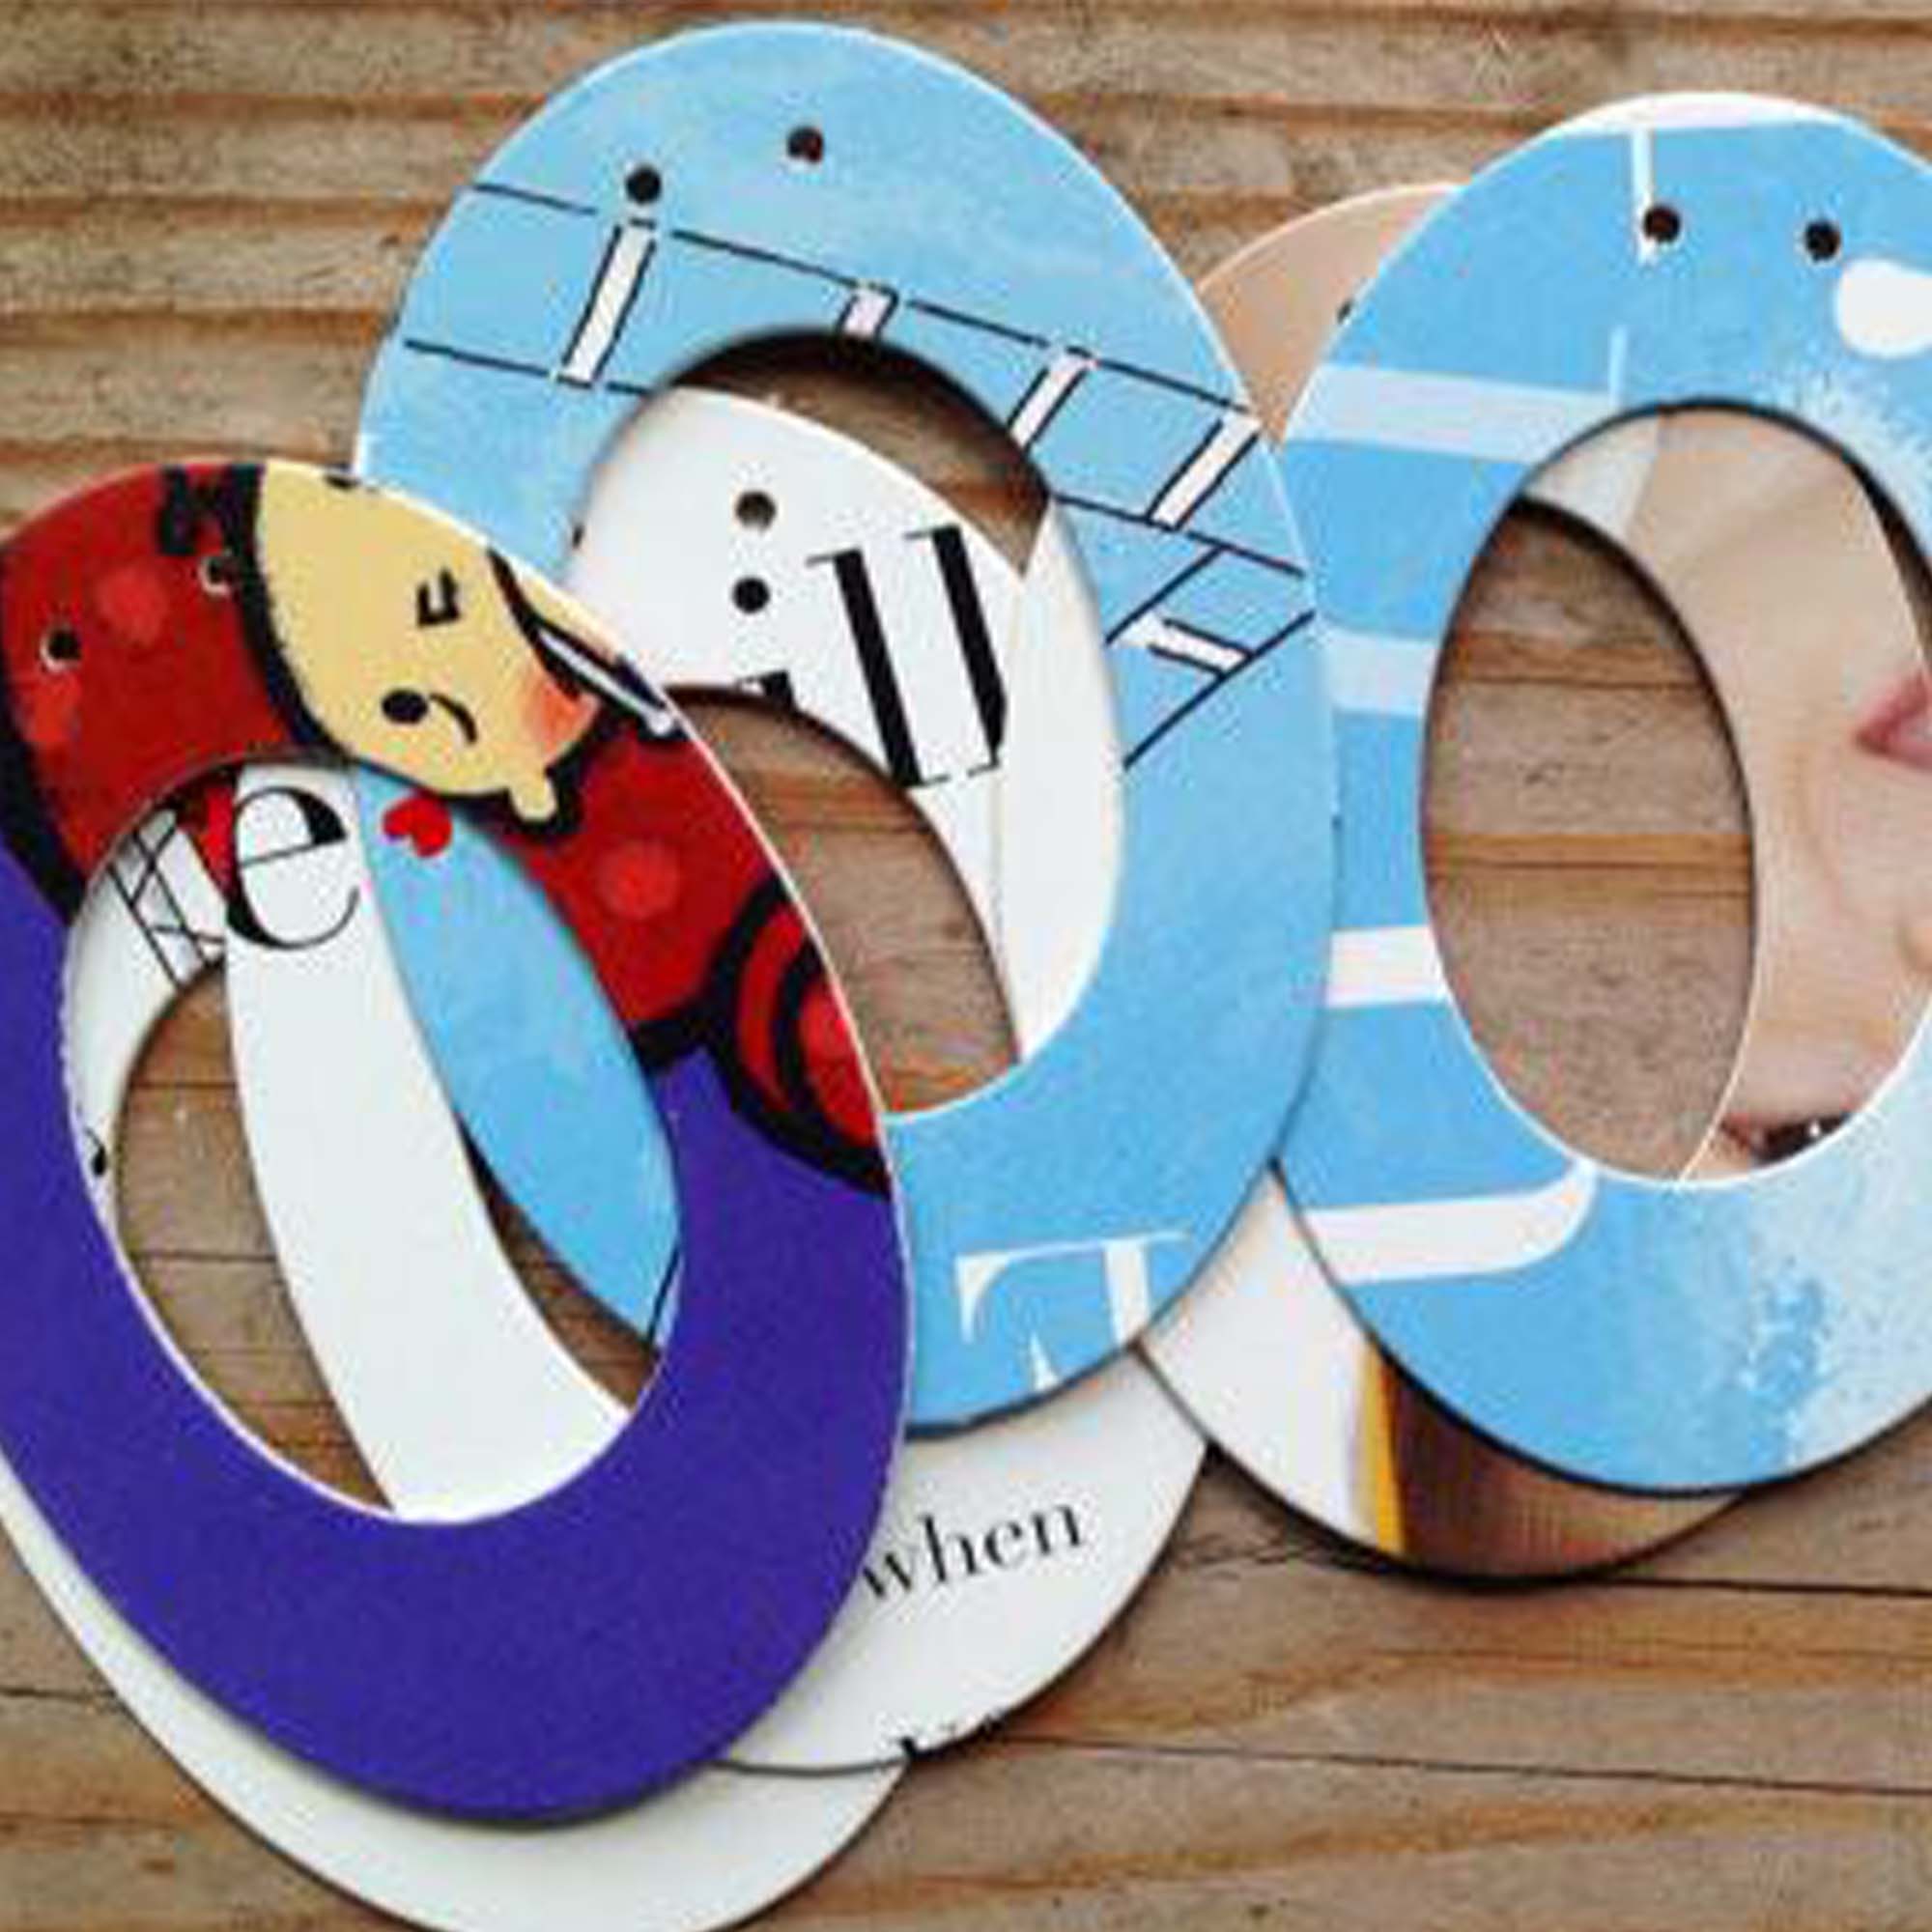 six designs of the letter "O", placed on exposed wood. Each design uses pages from children's picture books